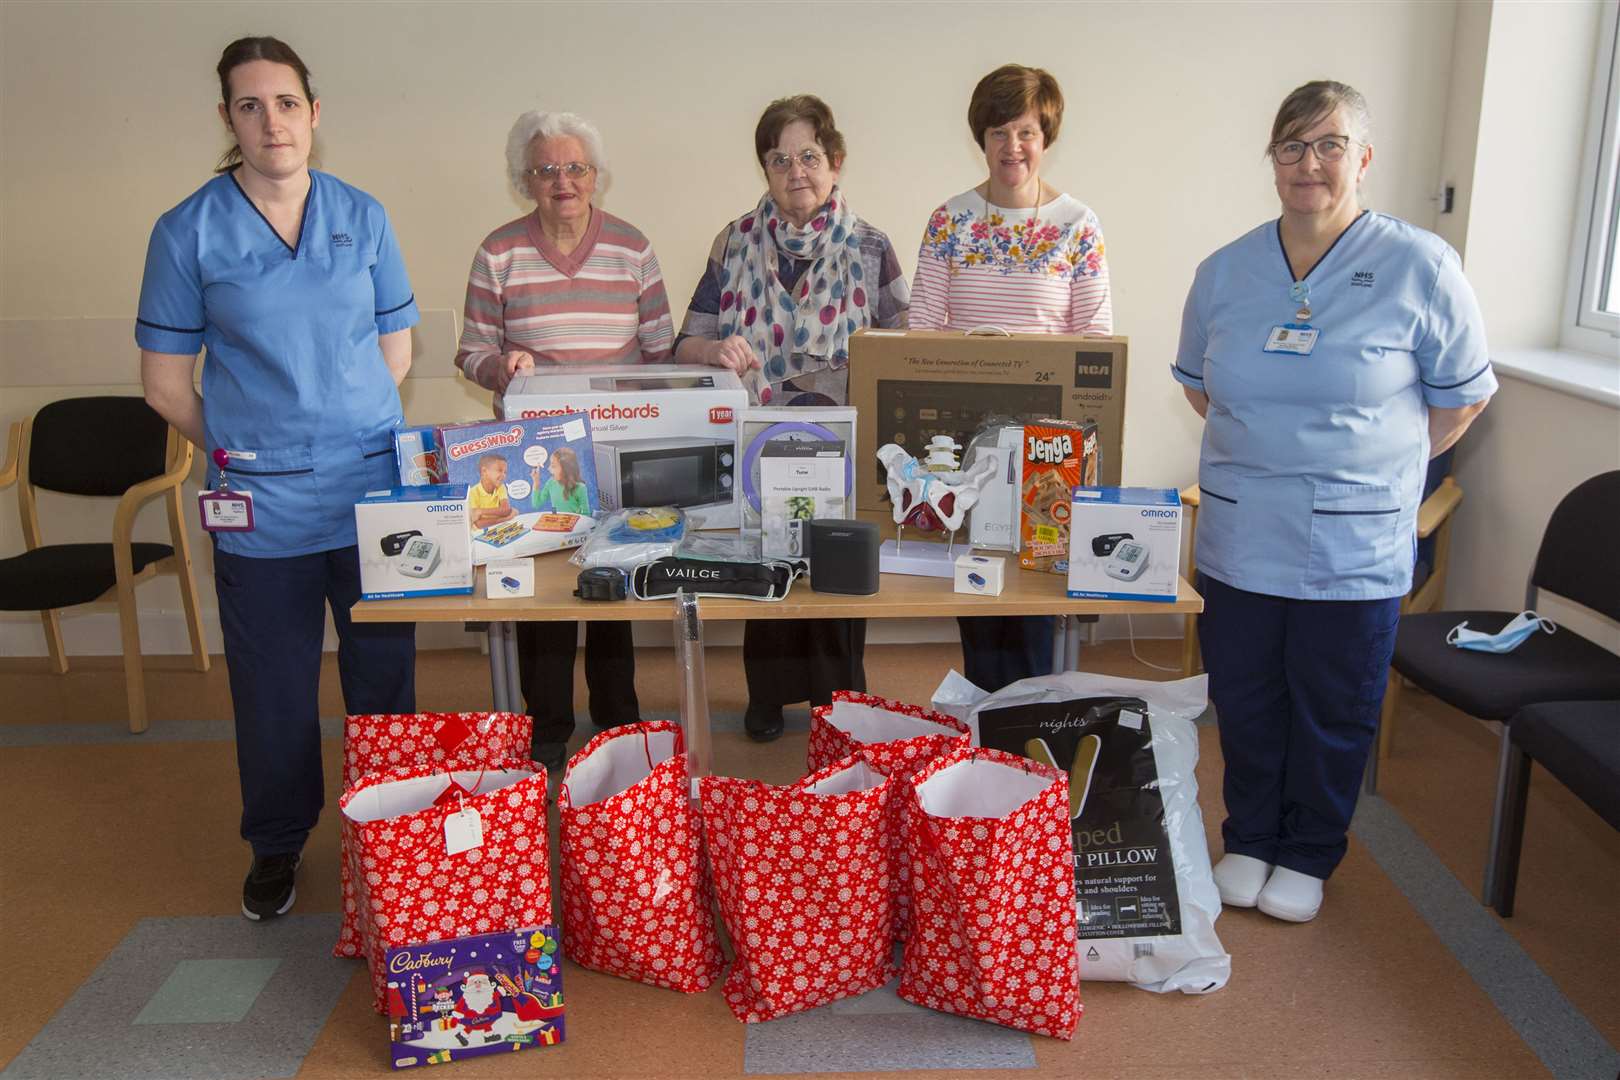 The League of Friends handing over gifts for the benefit of patients and staff in the various departments at Caithness General Hospital ahead of Christmas 2022. Picture: Robert MacDonald / Northern Studios